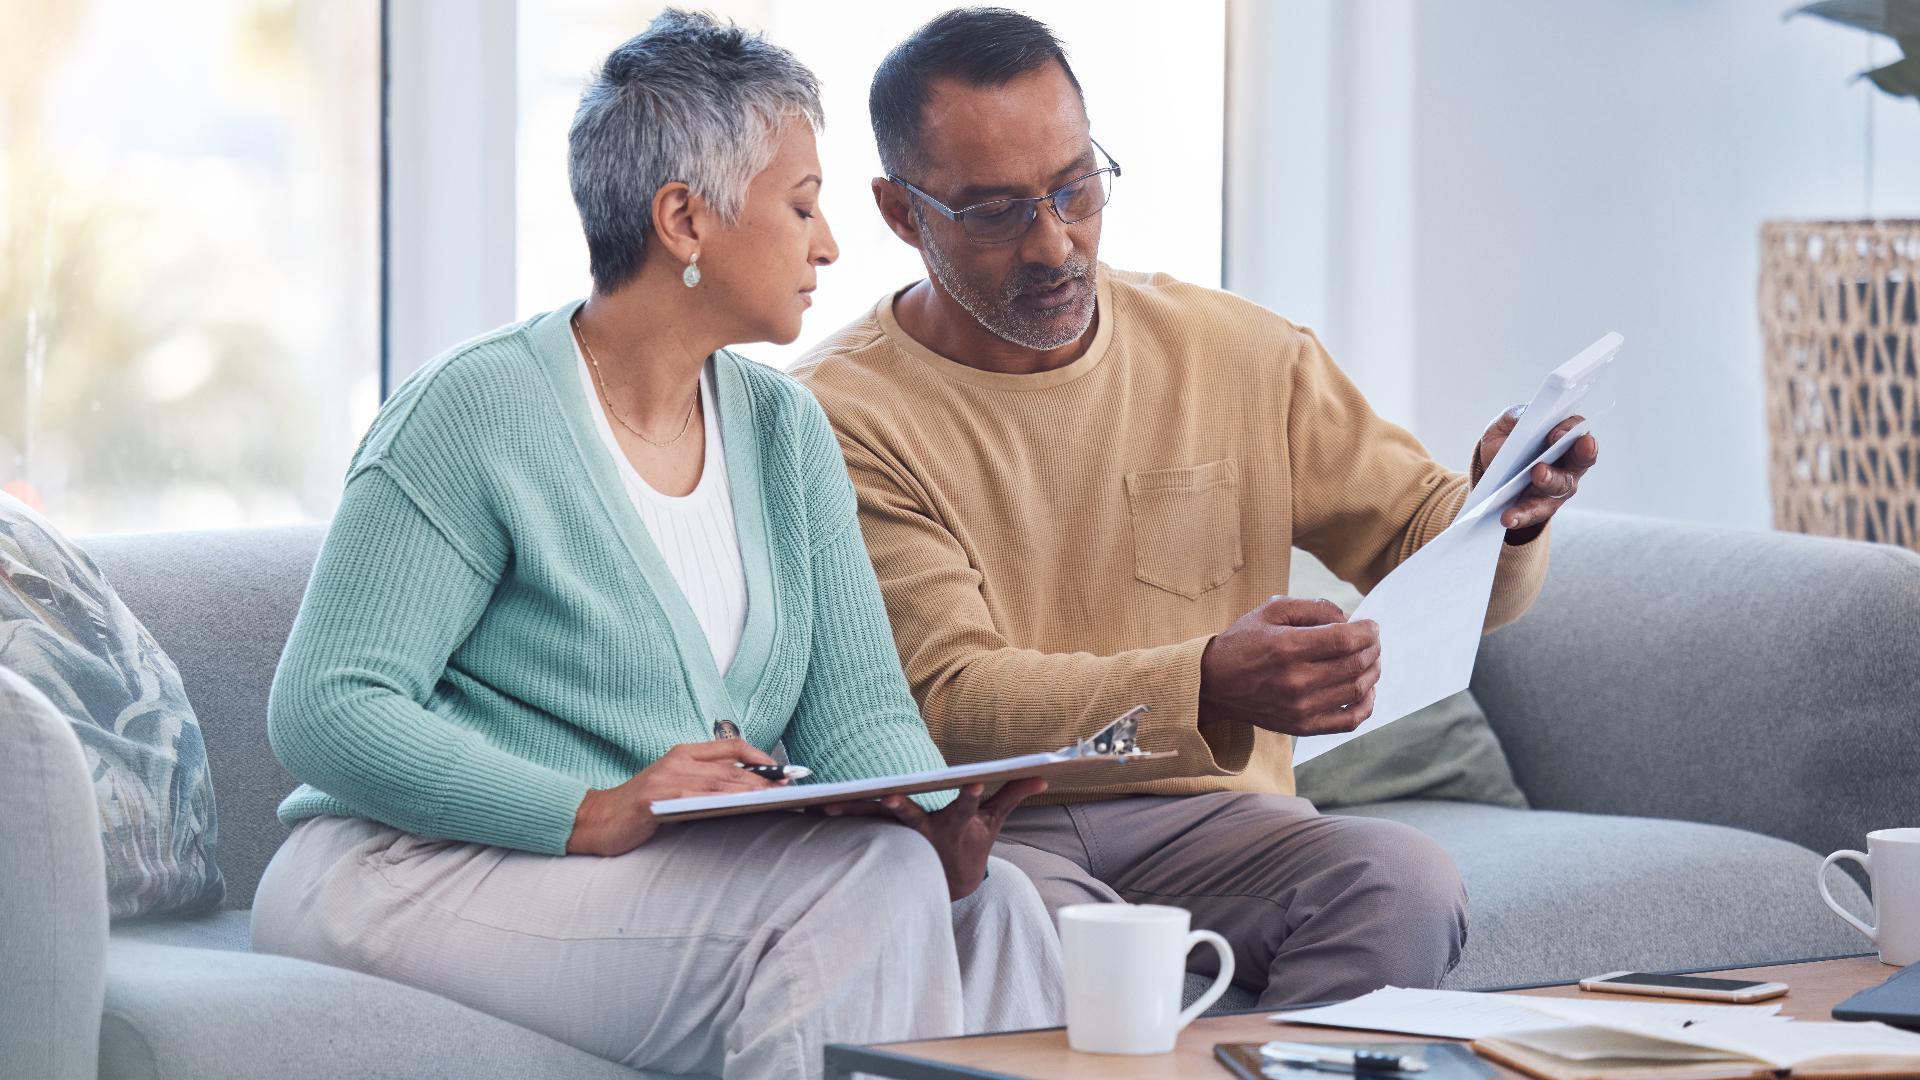 Sponsored by: New Perspective Financial Solutions. Tayvon Jackson, founder of New Perspective Financial Solutions shares his thoughts on preparing for retirement.